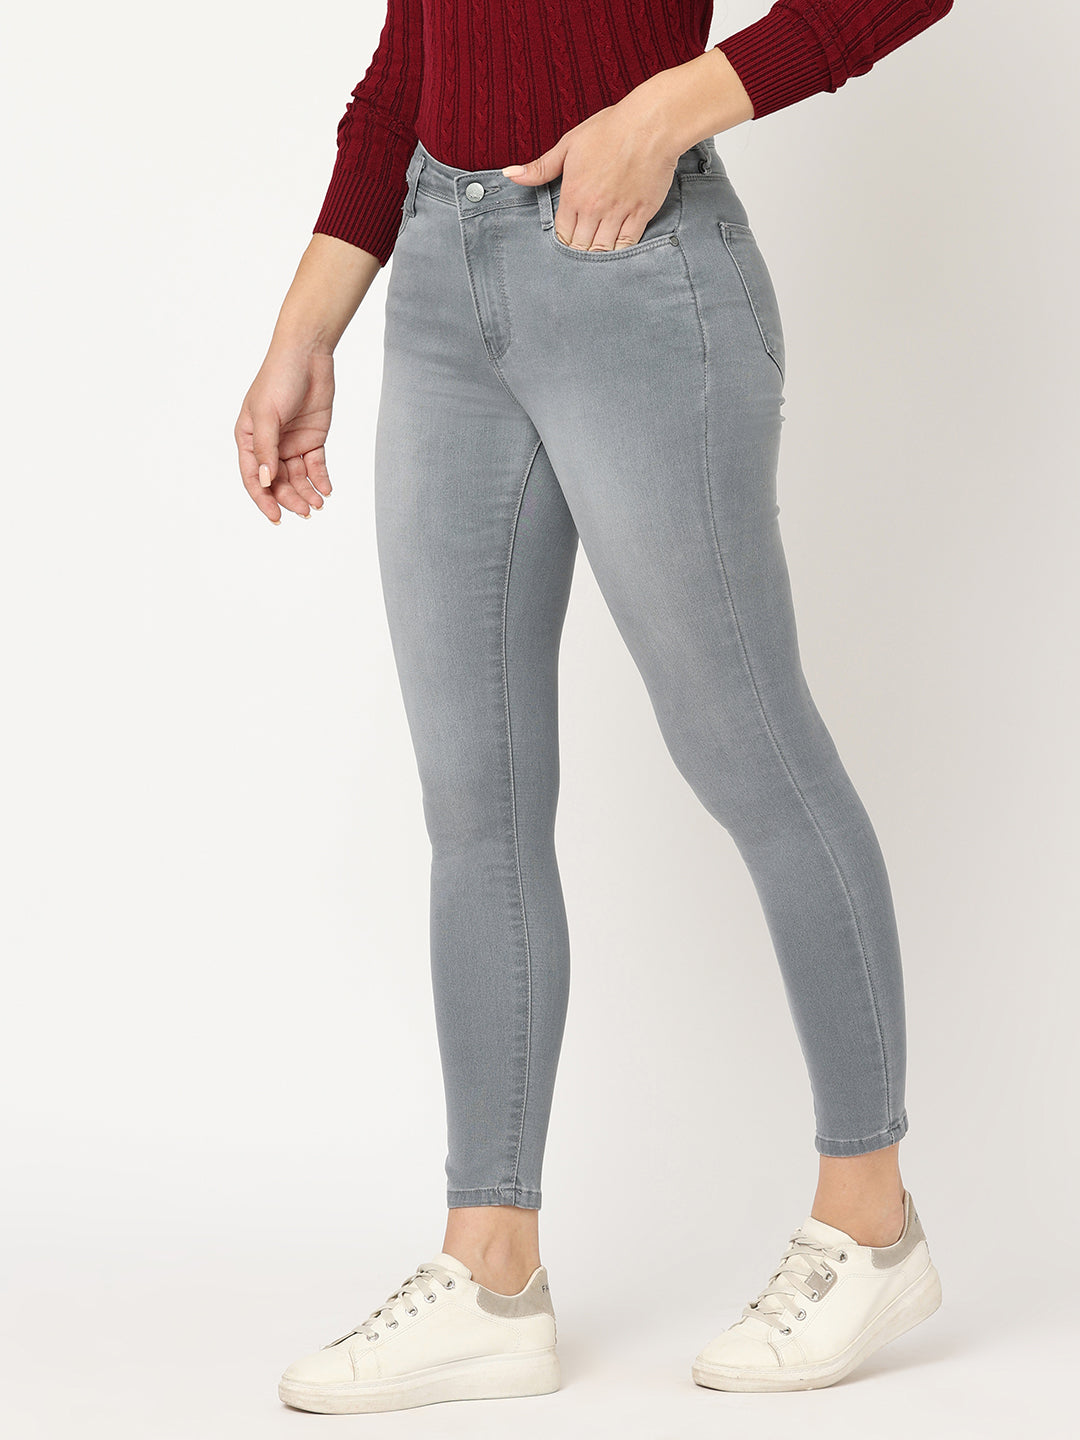 Highrise Skinny Grey Jeans